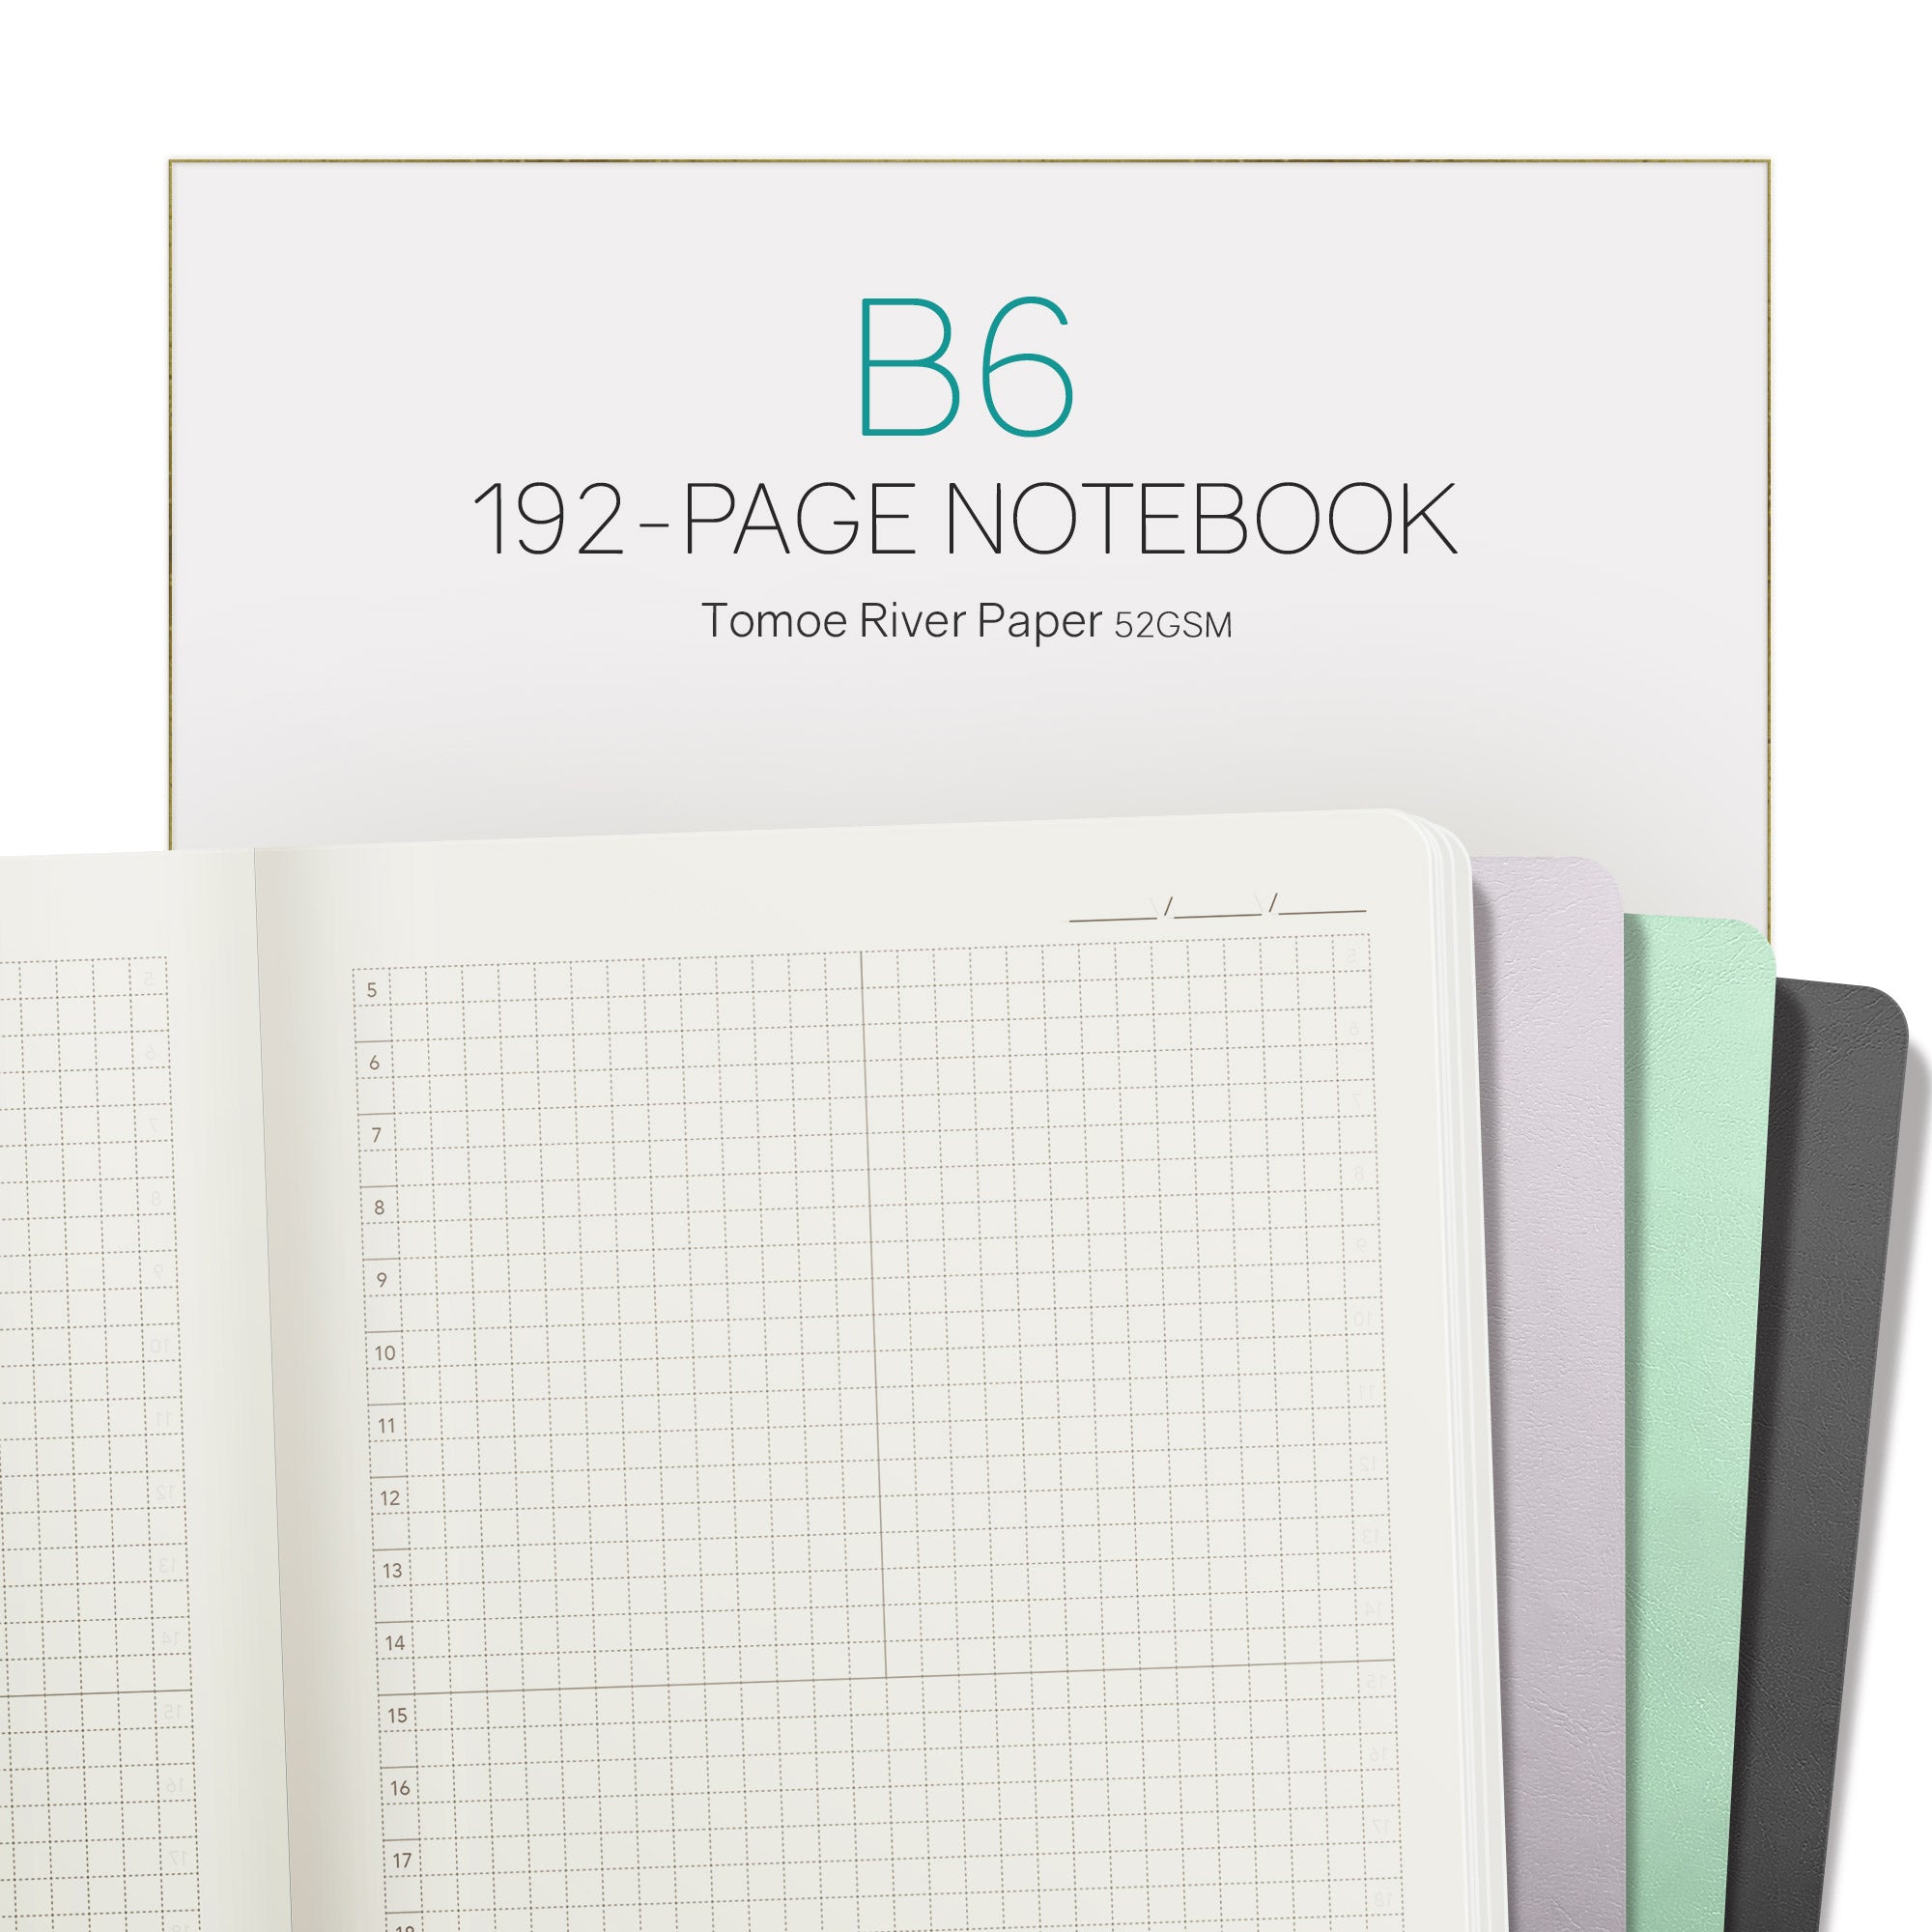 B6 Notebook (192 pages)